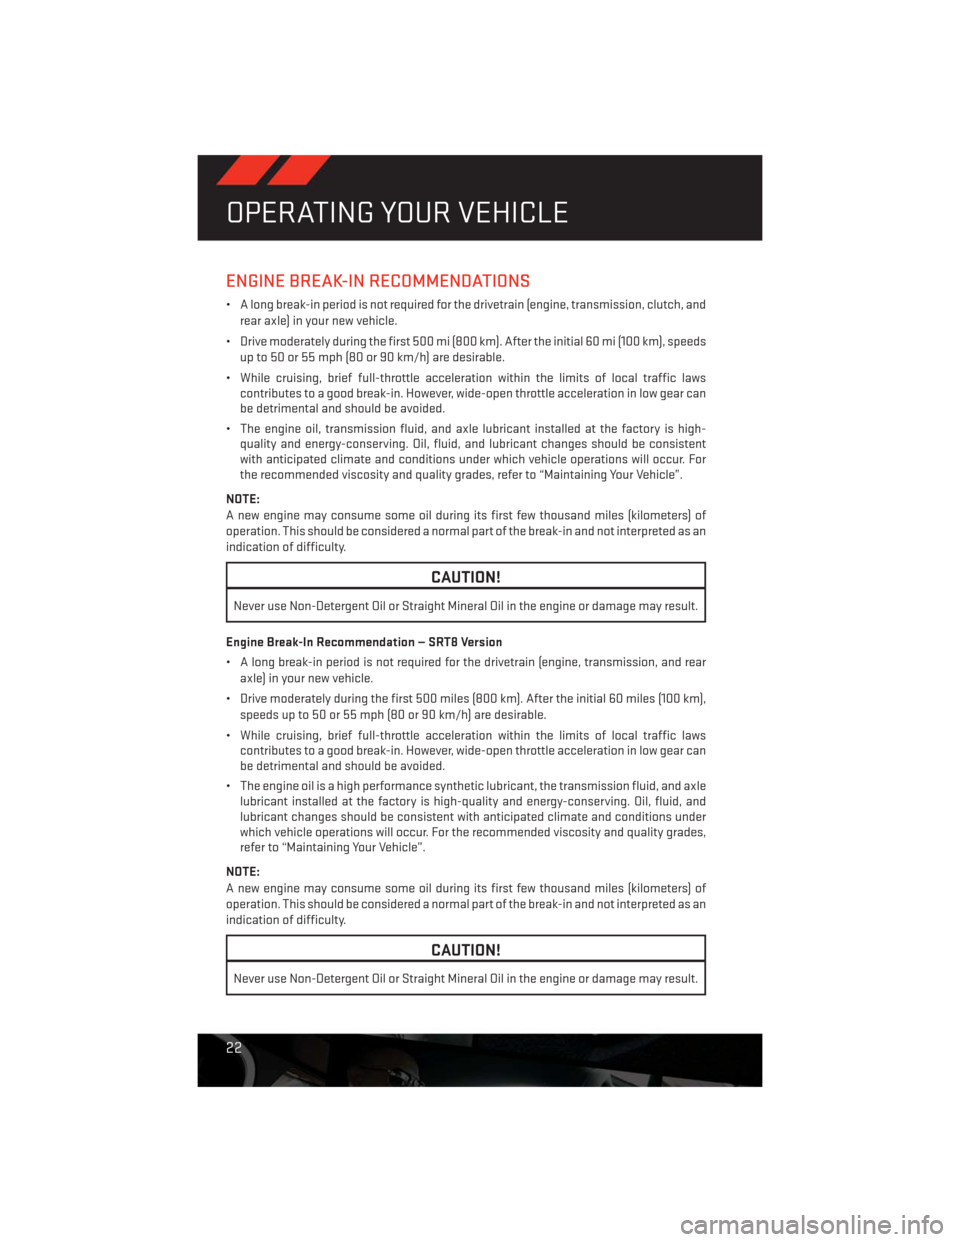 DODGE CHALLENGER 2013 3.G User Guide ENGINE BREAK-IN RECOMMENDATIONS
• A long break-in period is not required for the drivetrain (engine, transmission, clutch, and
rear axle) in your new vehicle.
• Drive moderately during the first 5